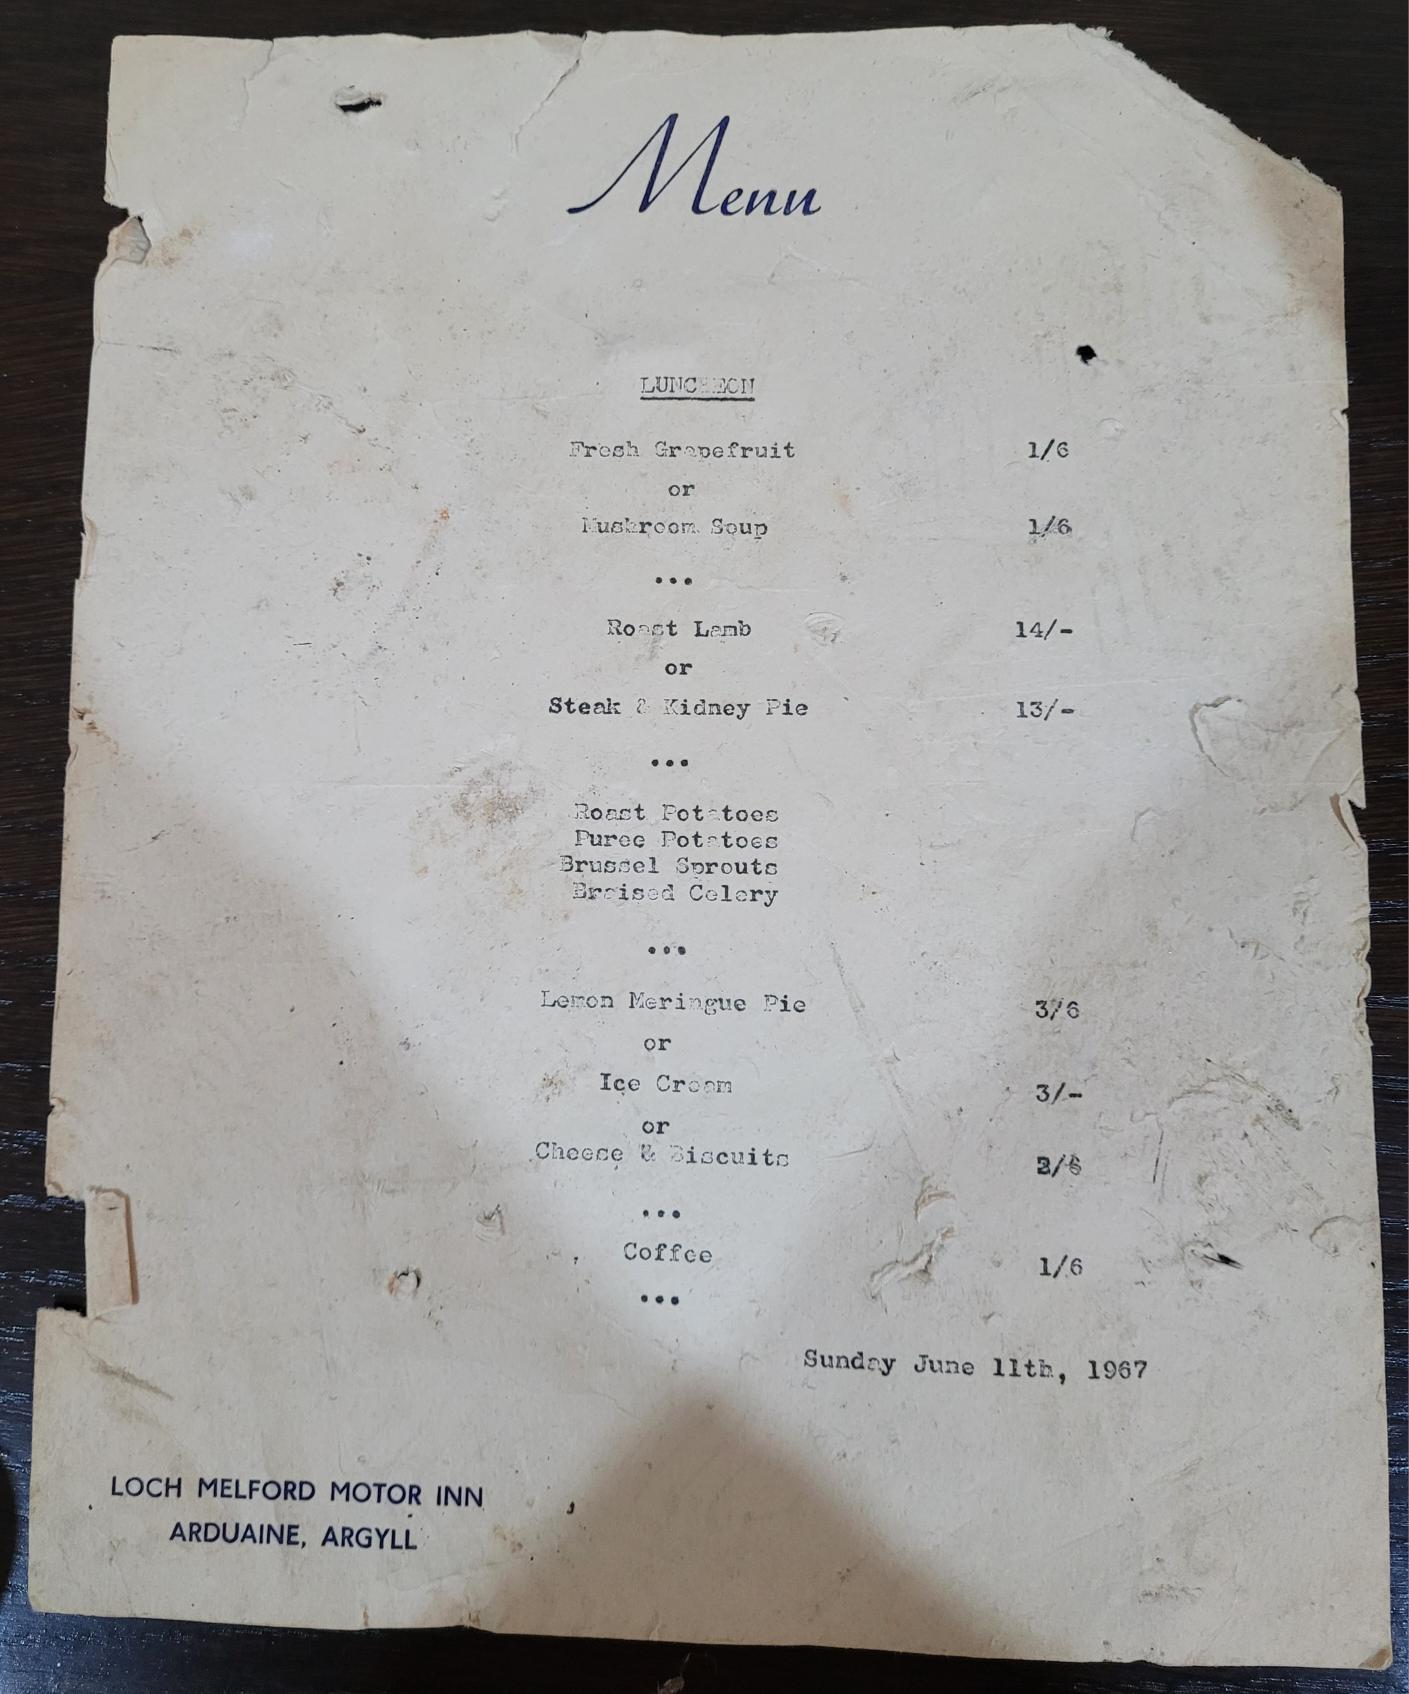 The menu was uncovered during the clear out of a cupboard.